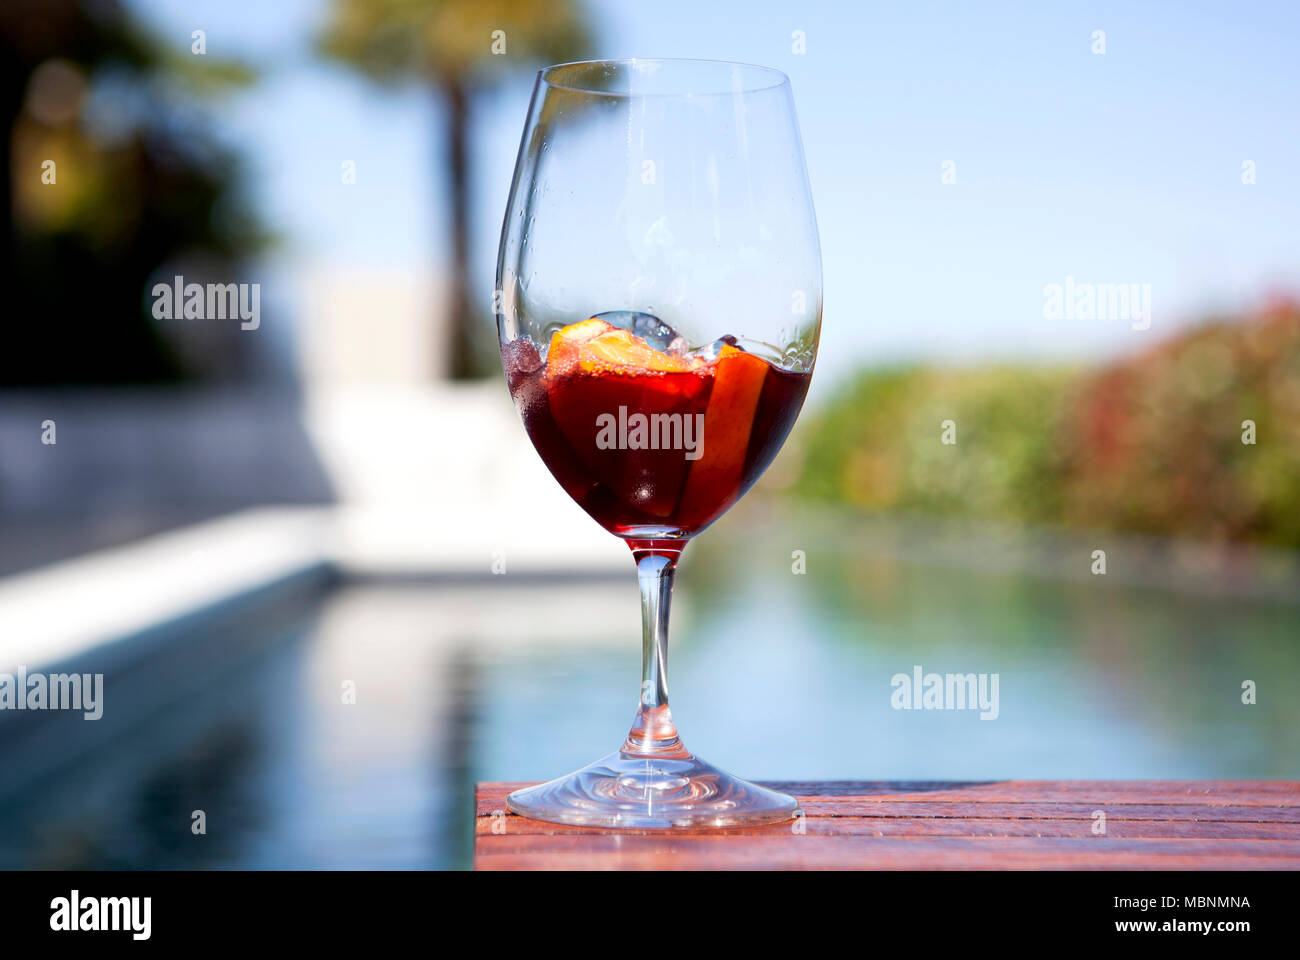 outside shot of a glass of red vermouth with ice cubes near a swimmingpool Stock Photo